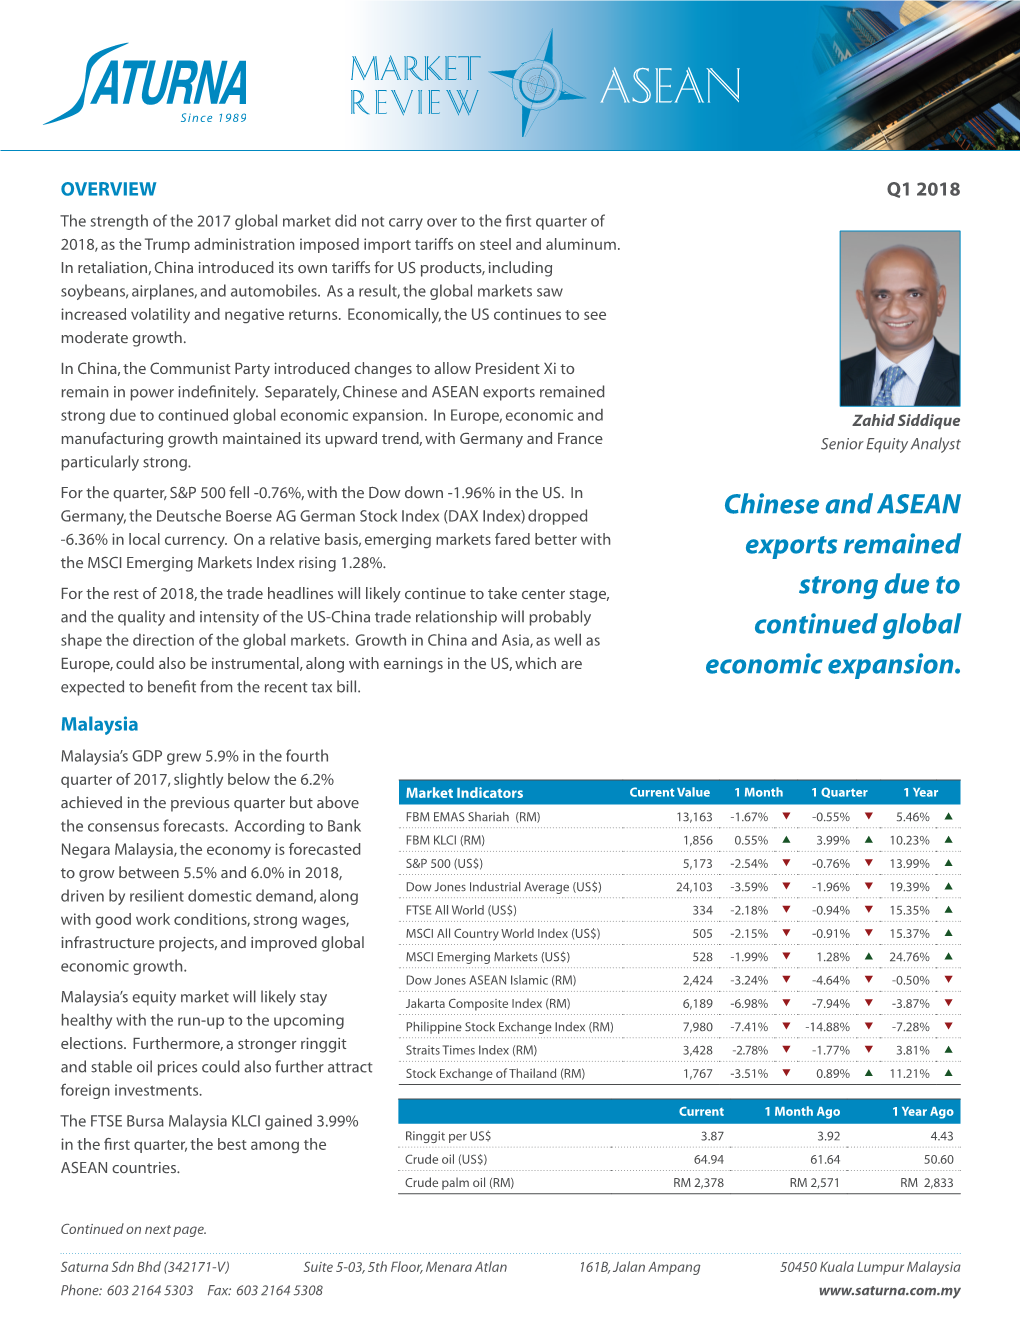 Chinese and ASEAN Exports Remained Strong Due to Continued Global Economic Expansion